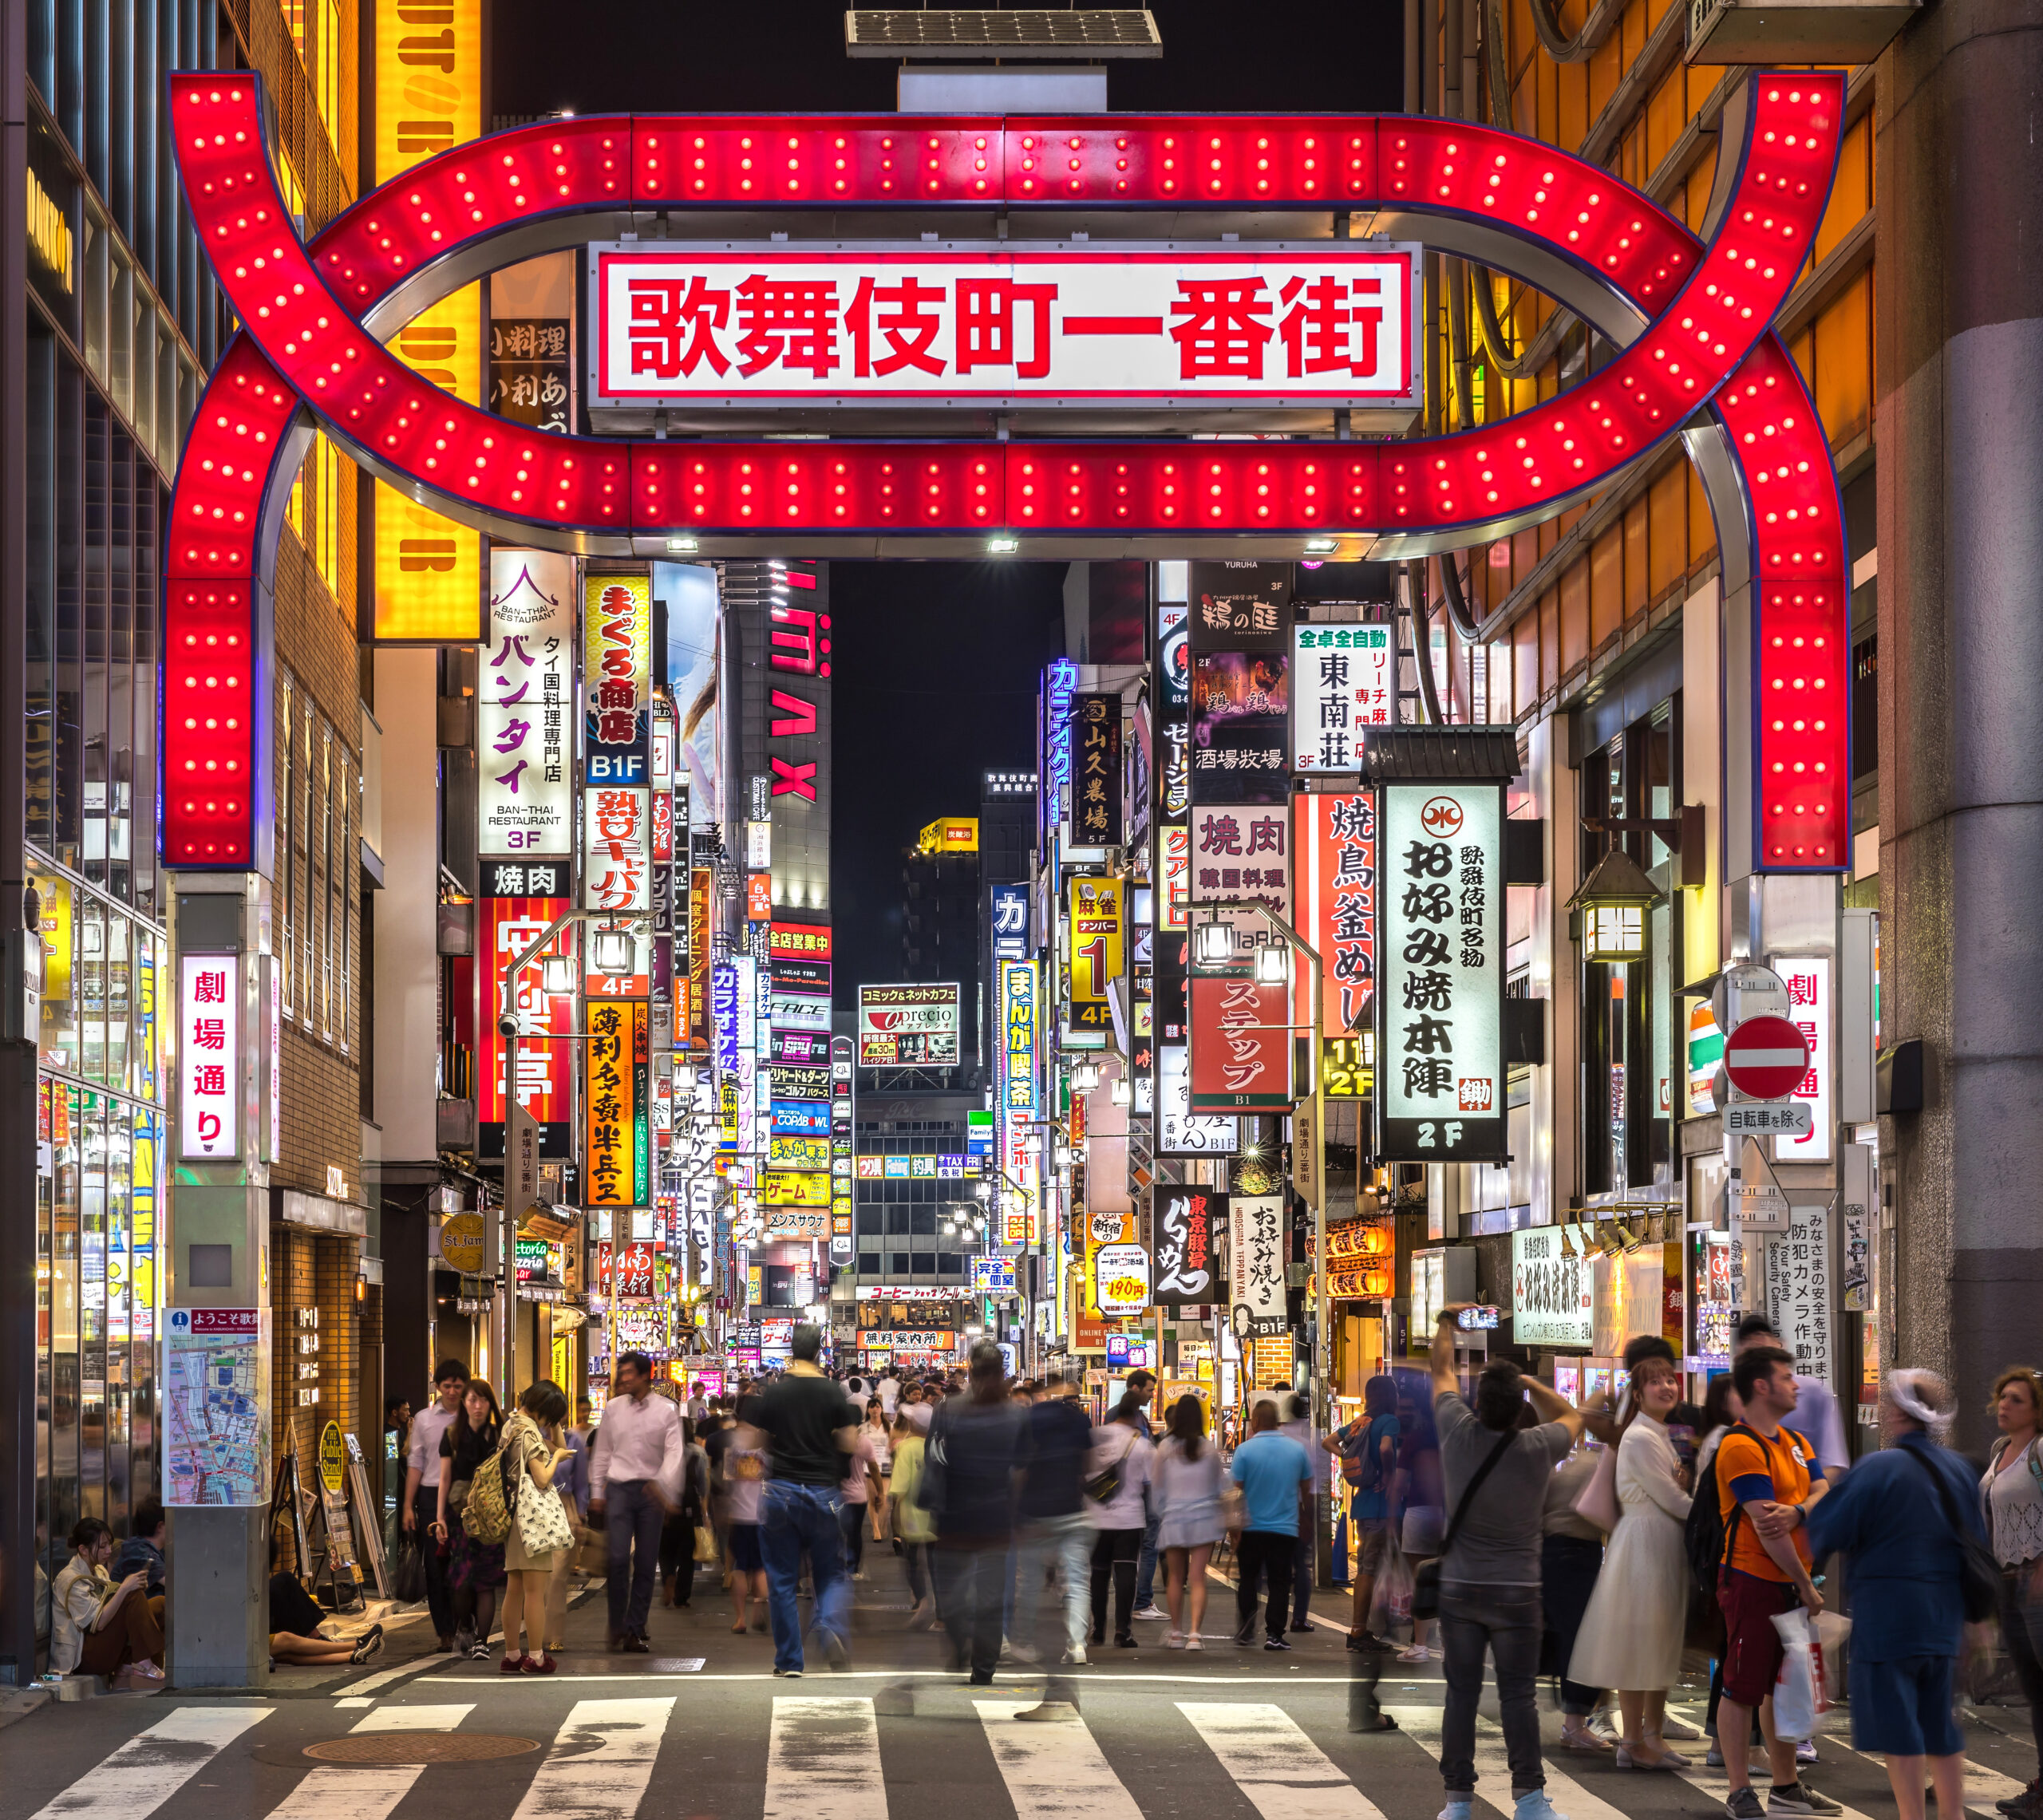 21 Arrested as Cops Raid Illegal Poker Club in Tokyo’s Red-Light District